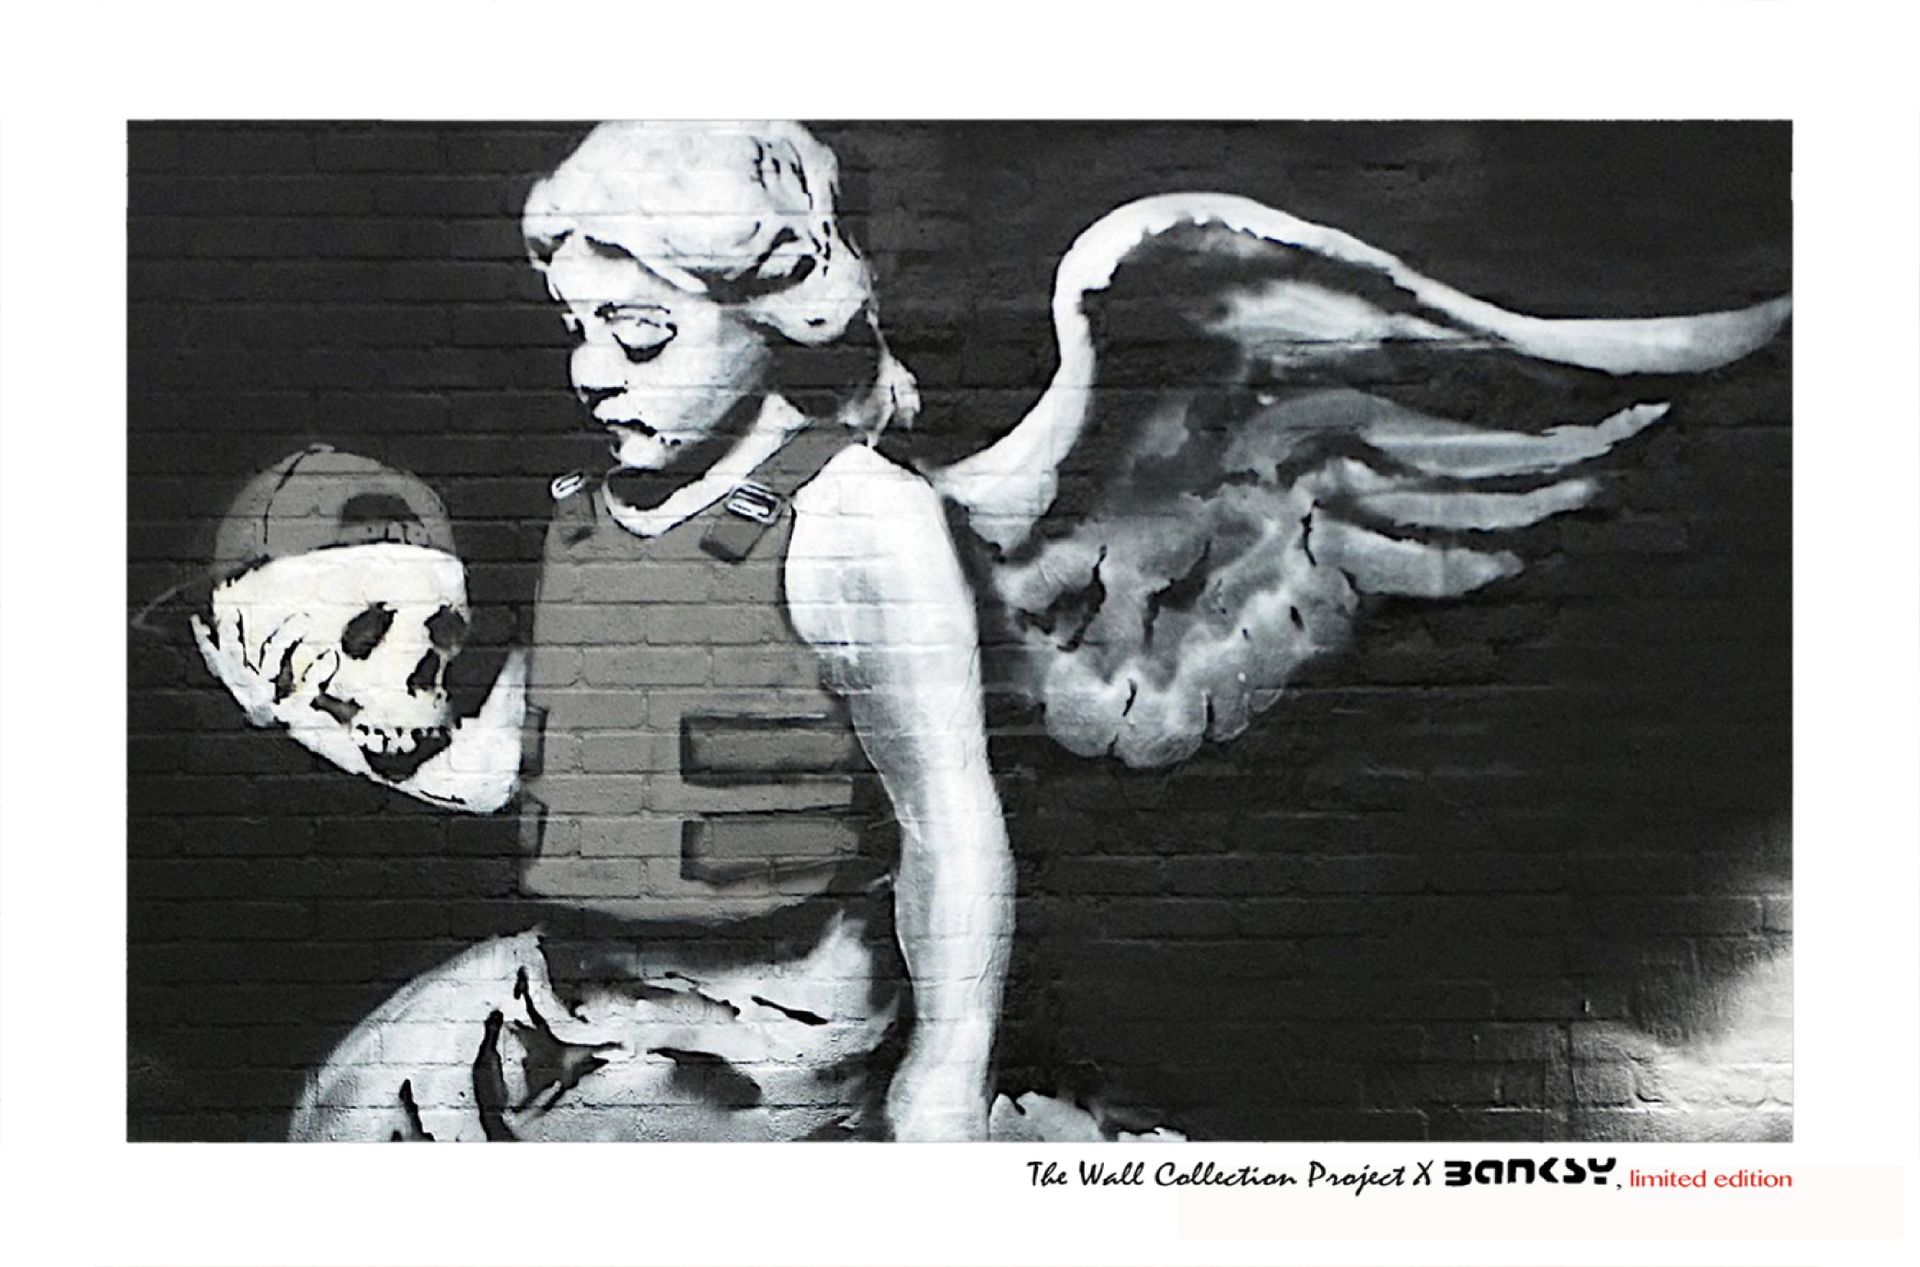 Null Banksy (nach)

Angel, The Wall Edition x Banksy after, visual gedruckt auf &hellip;